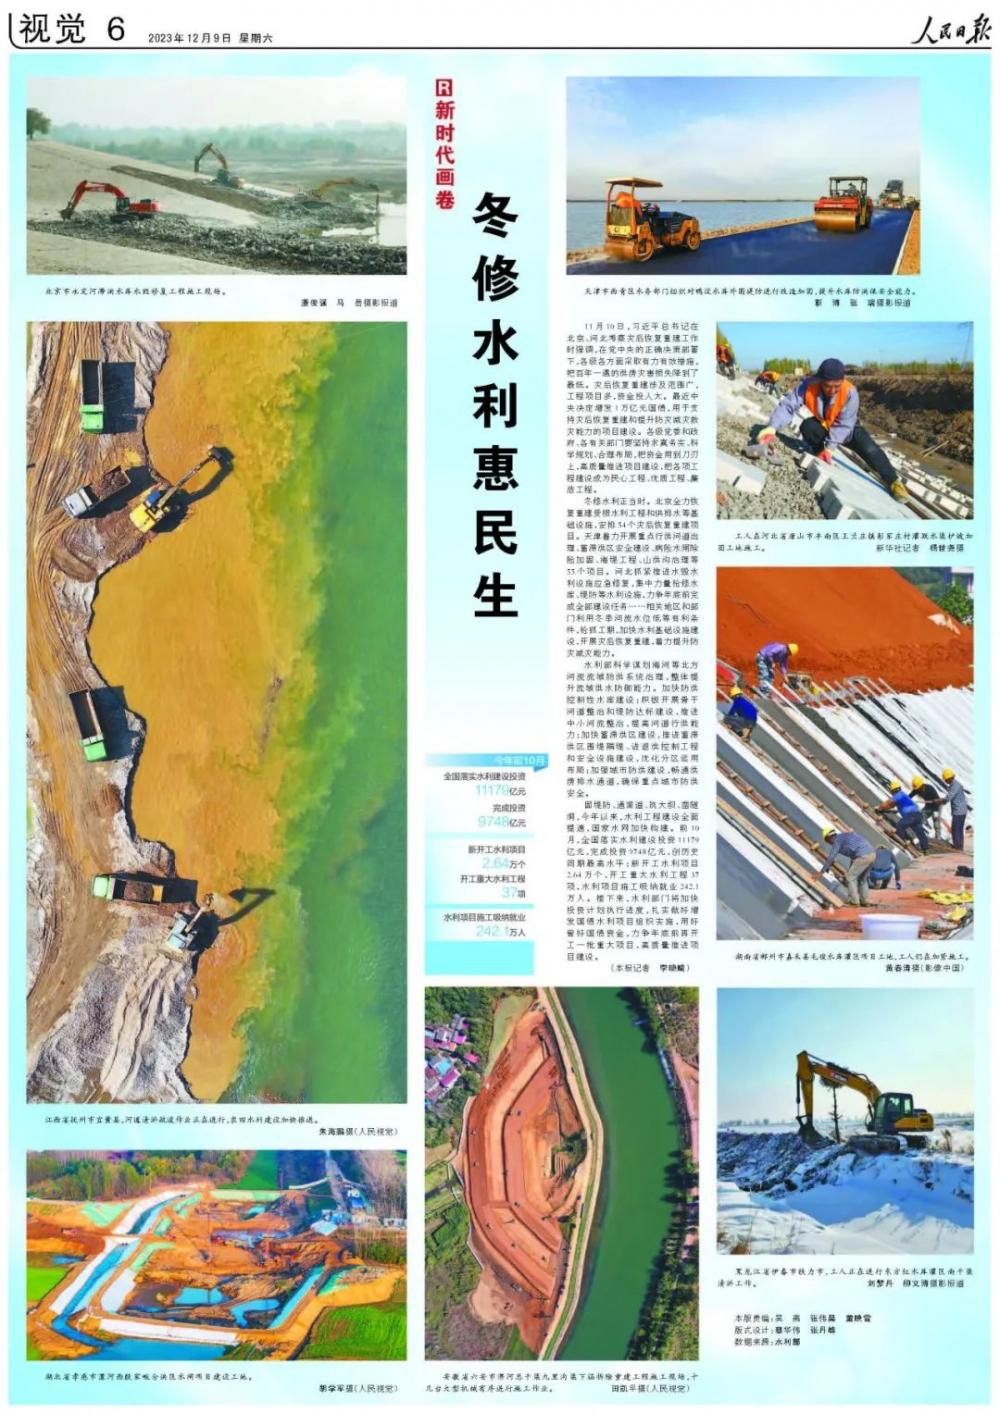 Water safety protection see Shanxi： People's Daily 丨 Dongxiu Water Conservancy benefits people's livelihood